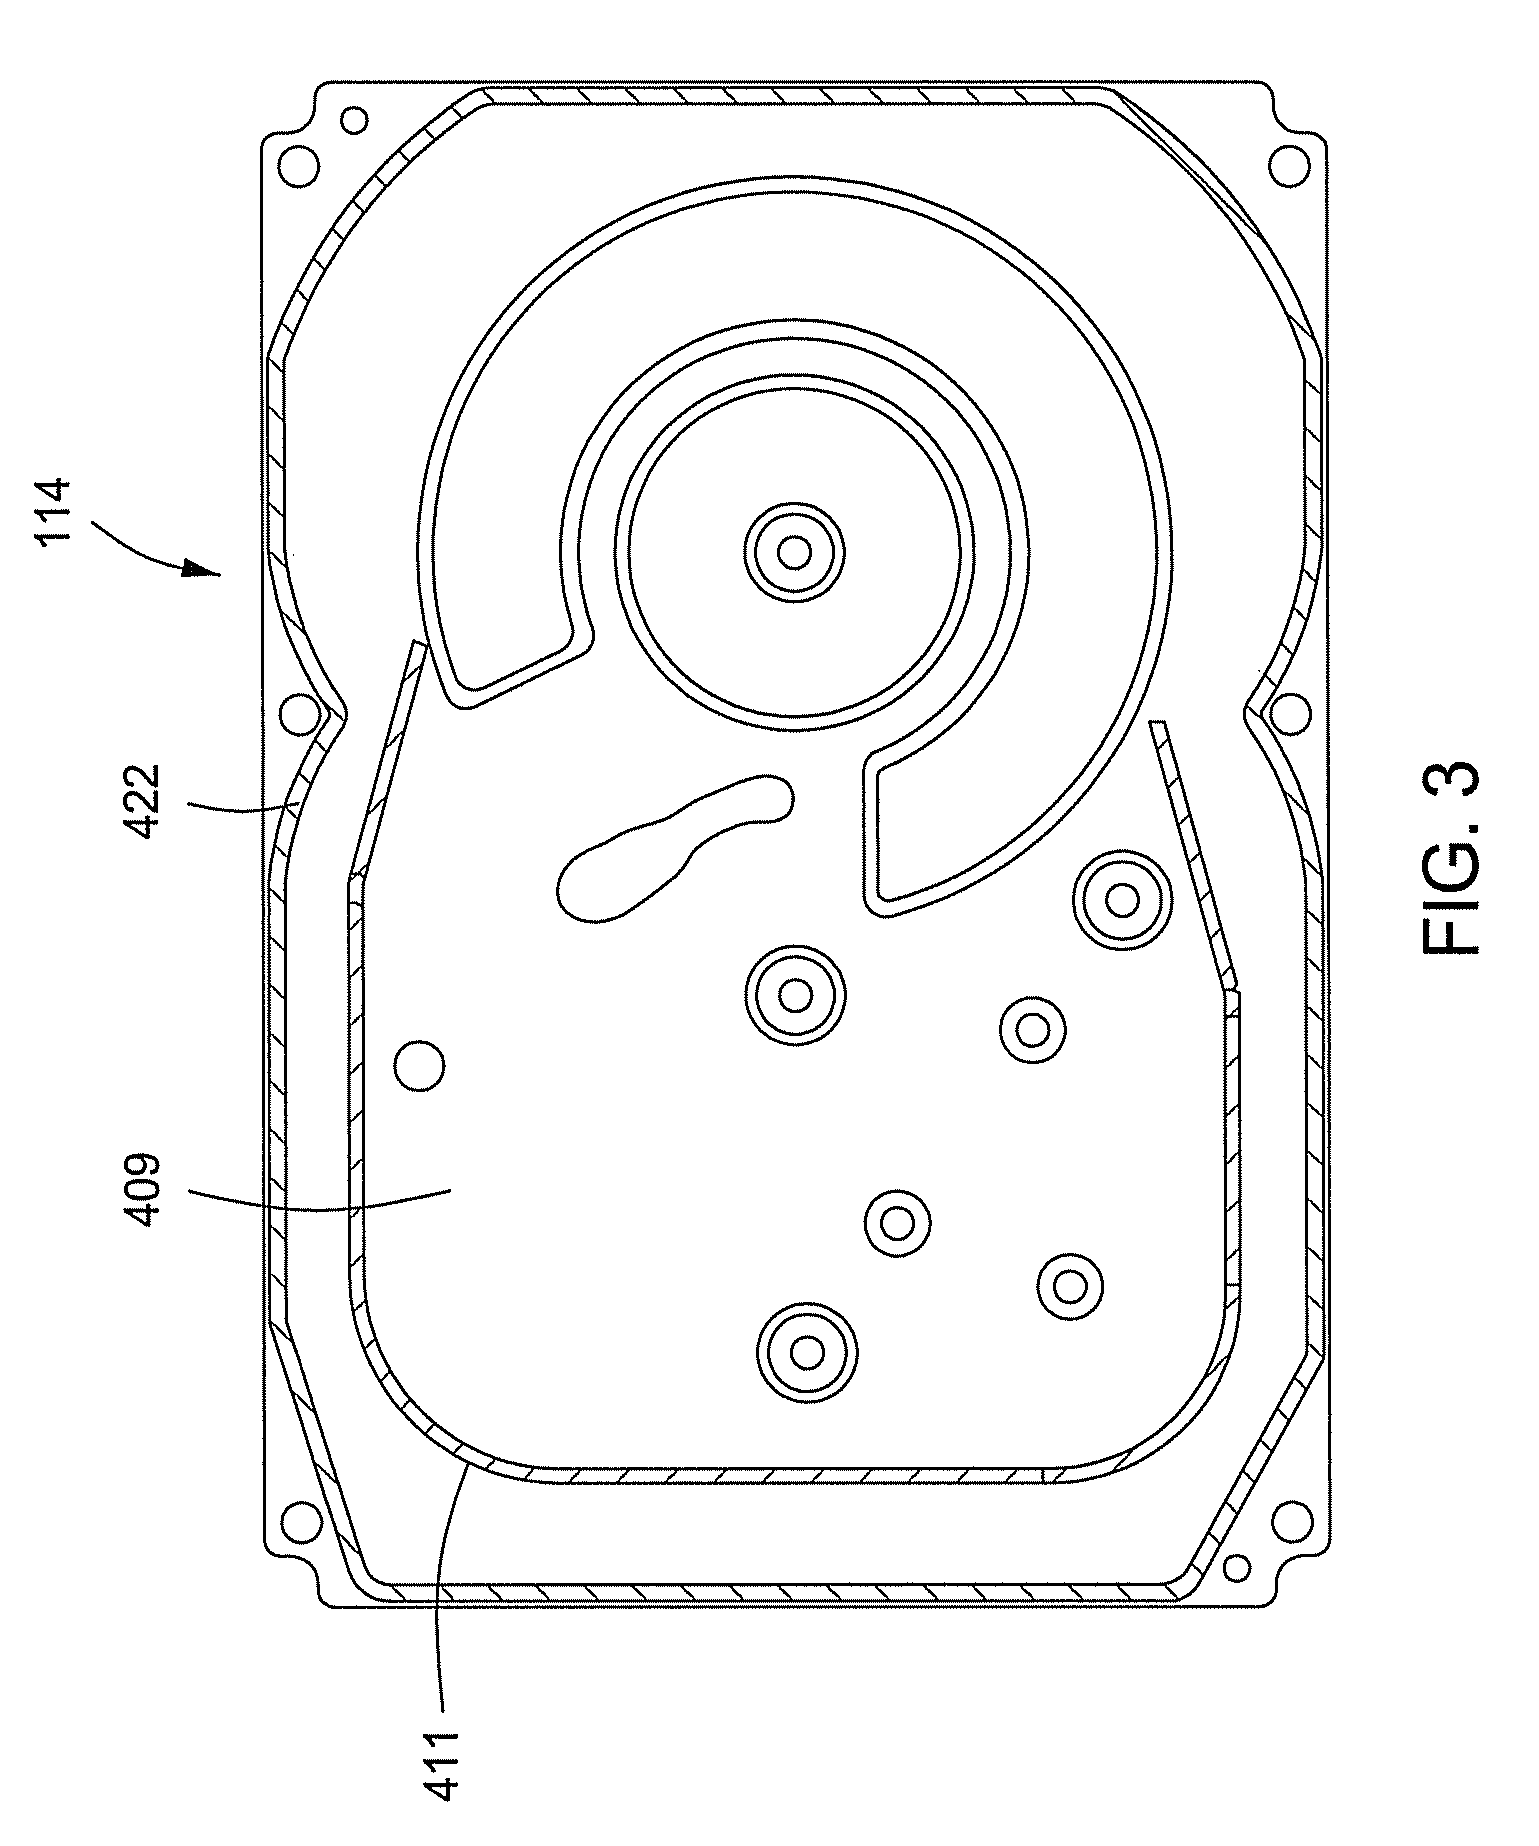 System, method, and apparatus for controlling and sealing airflow around disk drive bypass walls